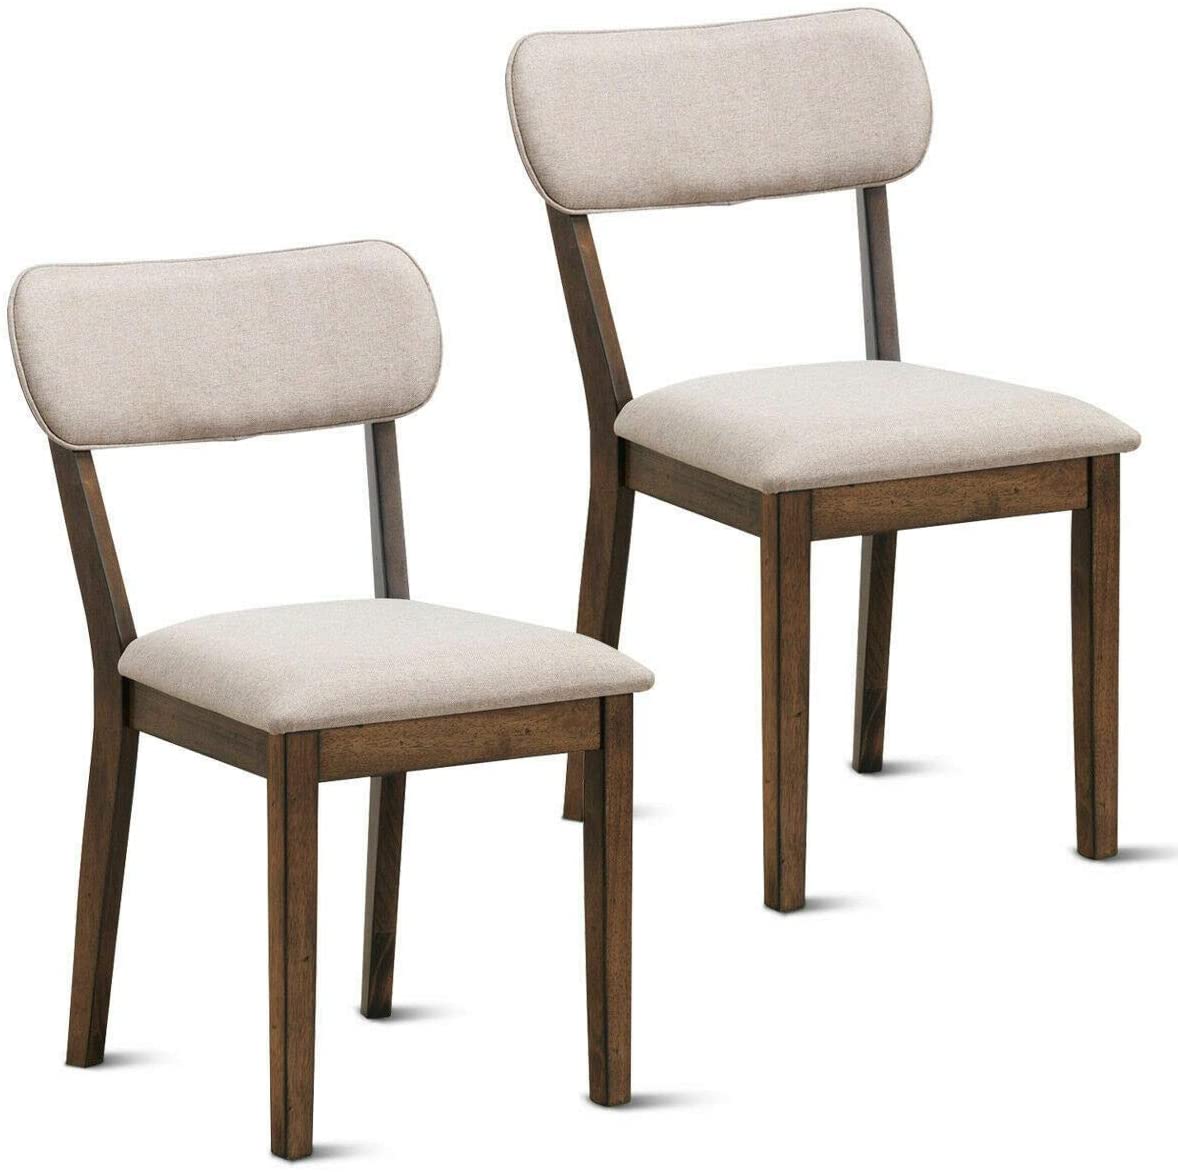 B08TMJ26NN Set of 2 Home Kitchen Room Dining Chair Wood LegArmless Seat Fabric Upholstered